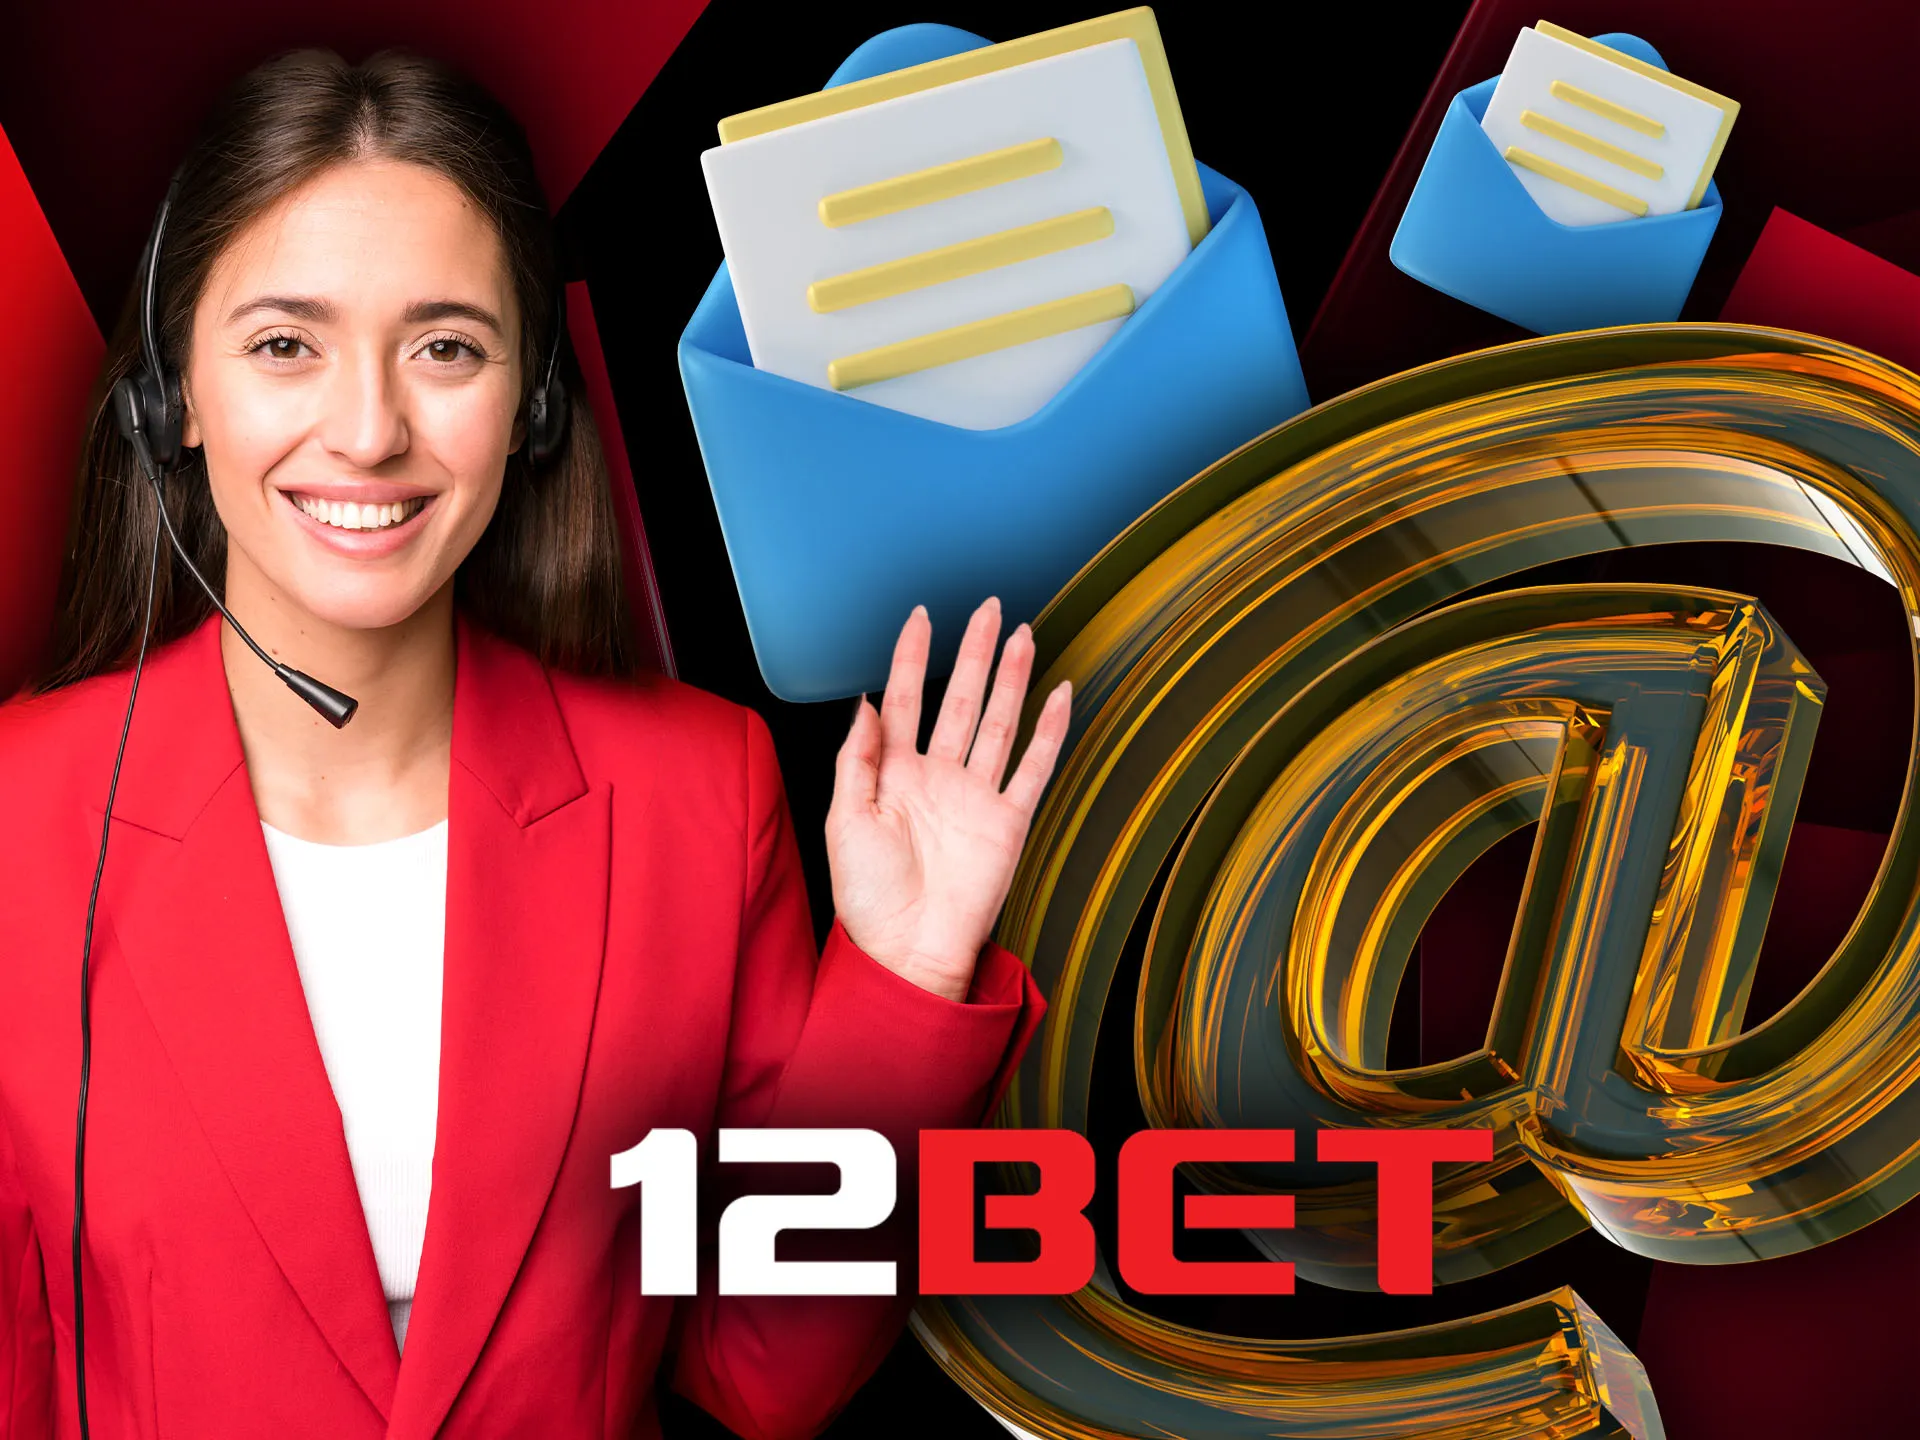 Send your question to 12bet support using email.